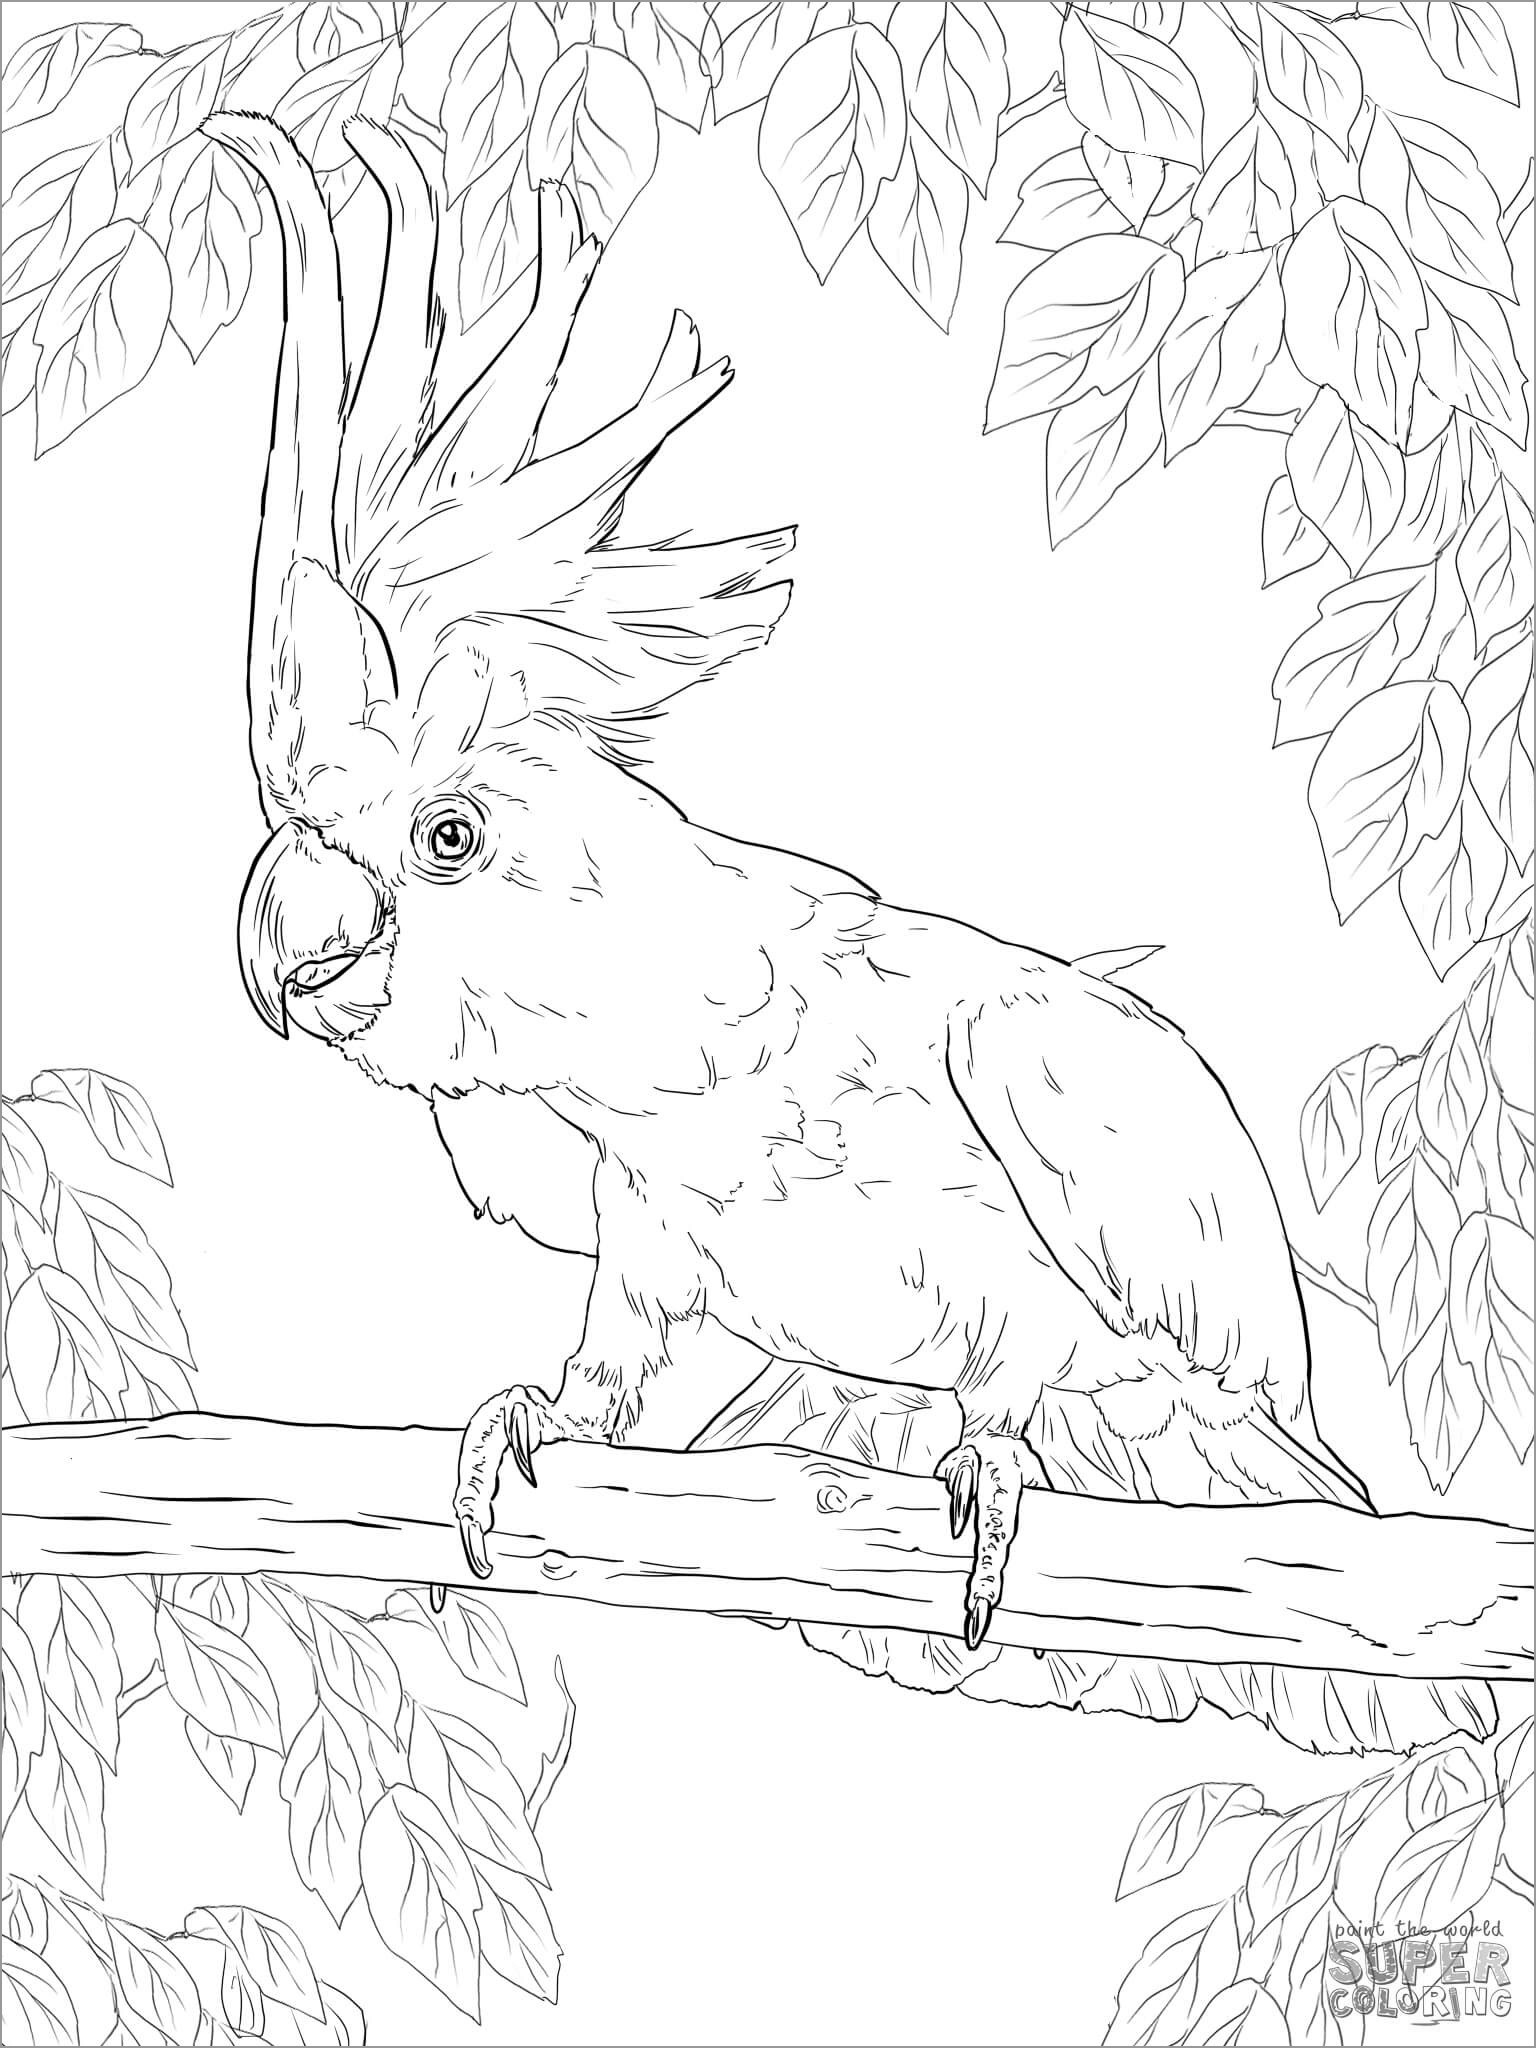 Cockatoos Coloring Page to Print